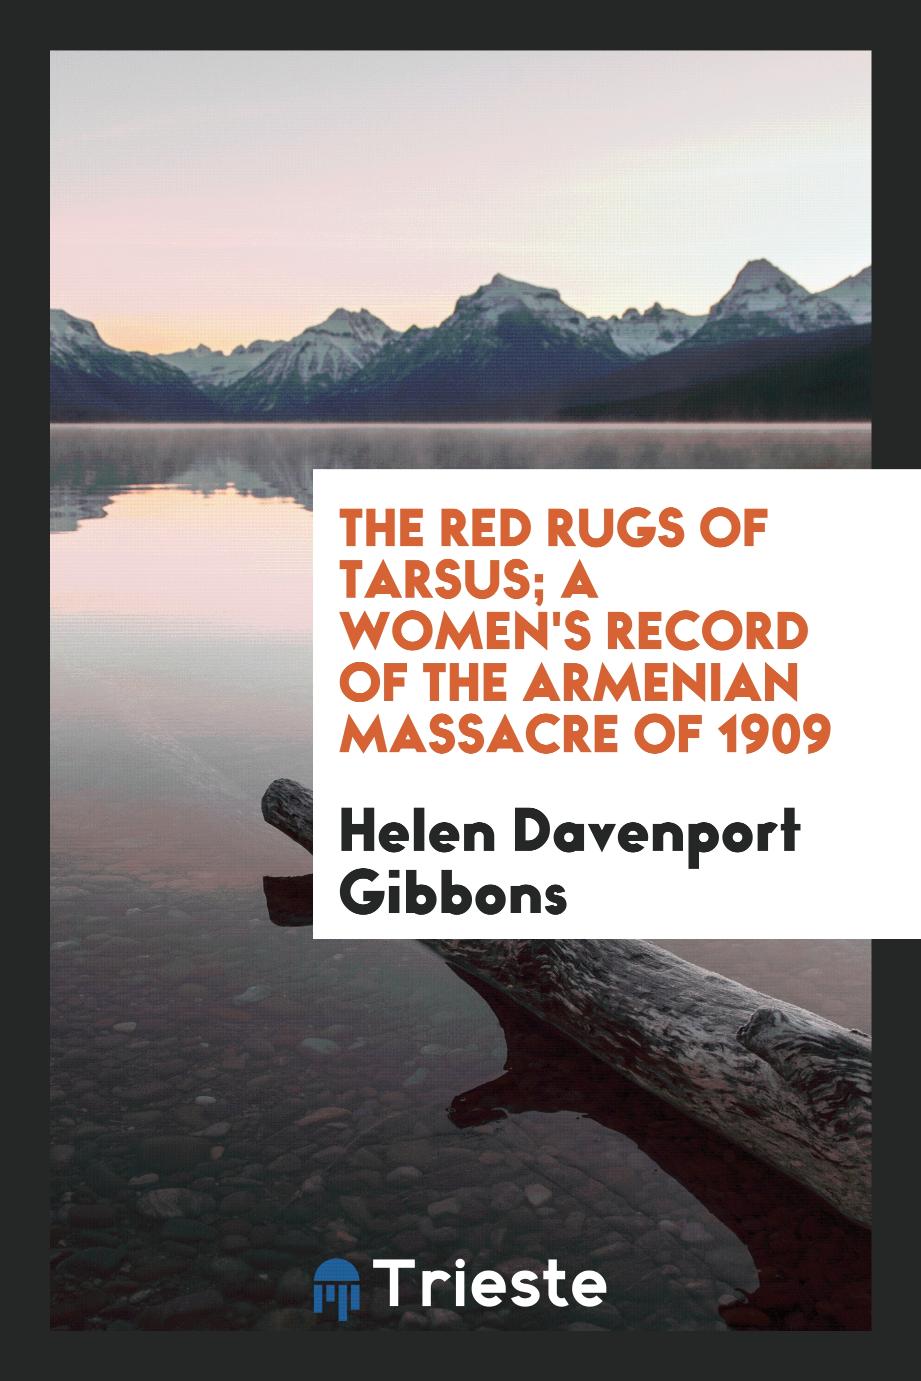 The red rugs of Tarsus; a women's record of the Armenian massacre of 1909